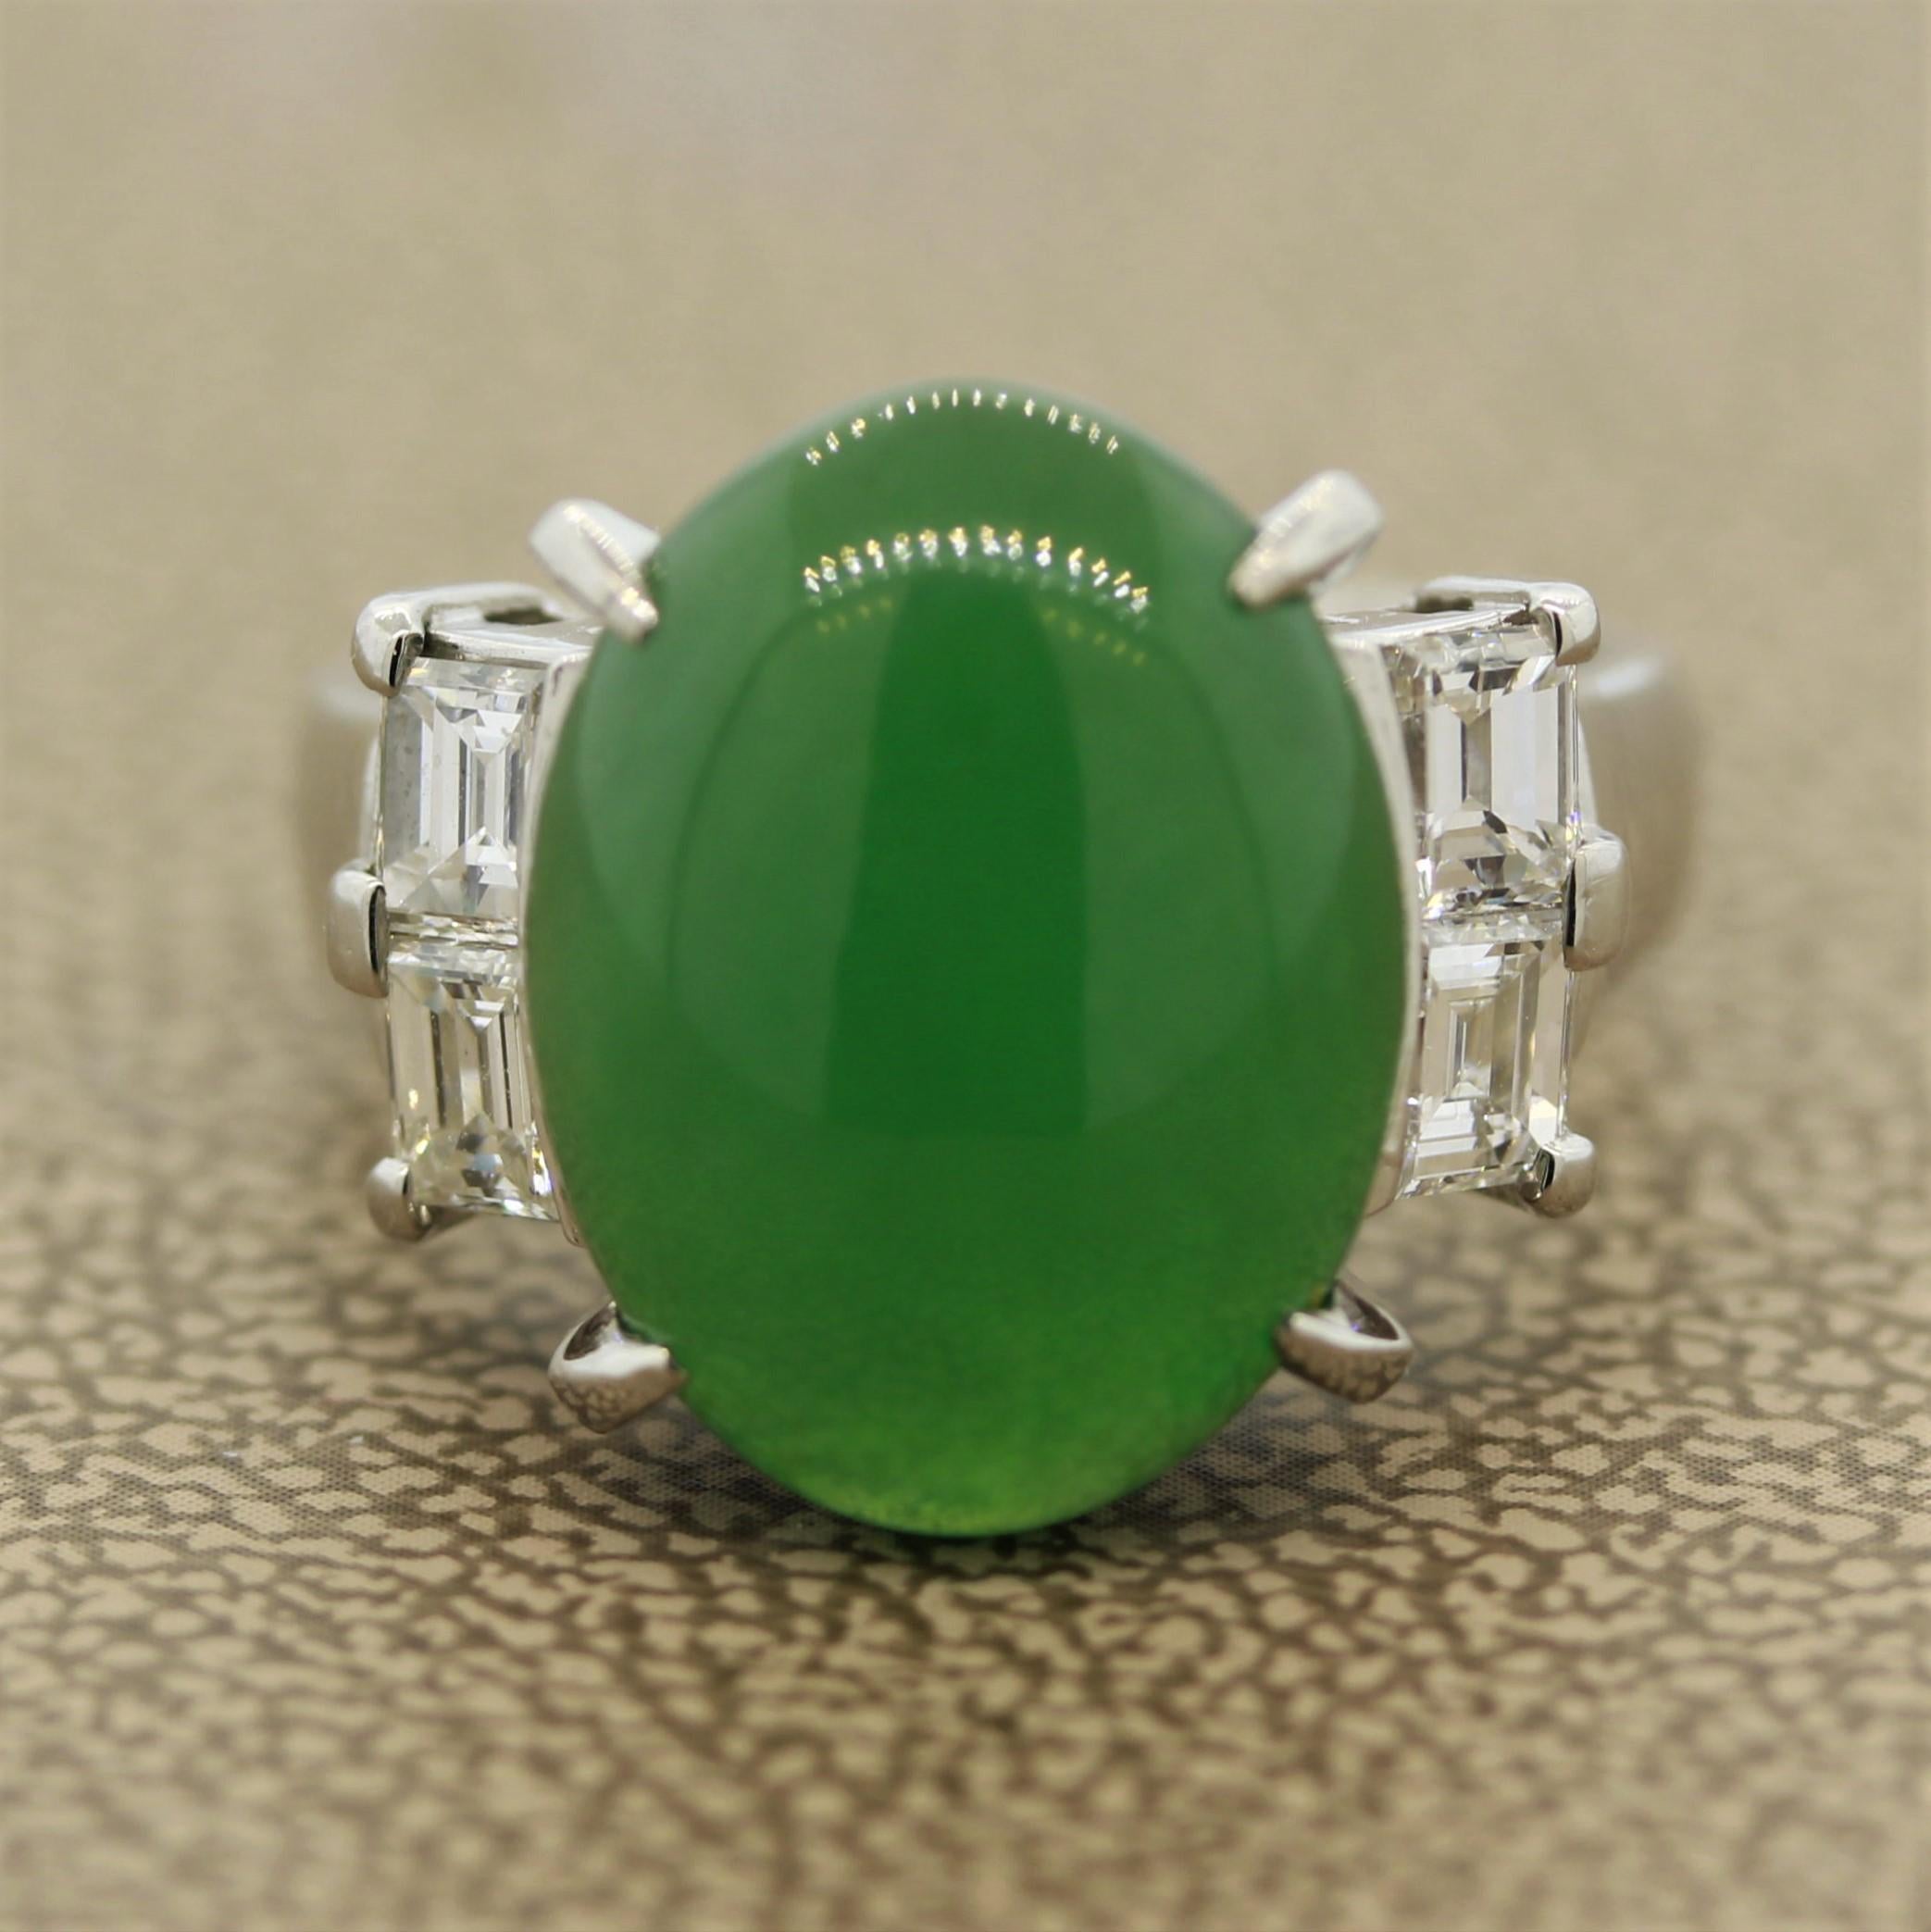 A classic natural Jadeite Jade ring set in a hand fabricated platinum mounting. The jade is polished as a beautiful smooth oval cabochon and weighs 7.30 carats. It is accented by 4 large baguette cut diamonds weighing a total of 0.79 carats. Type A